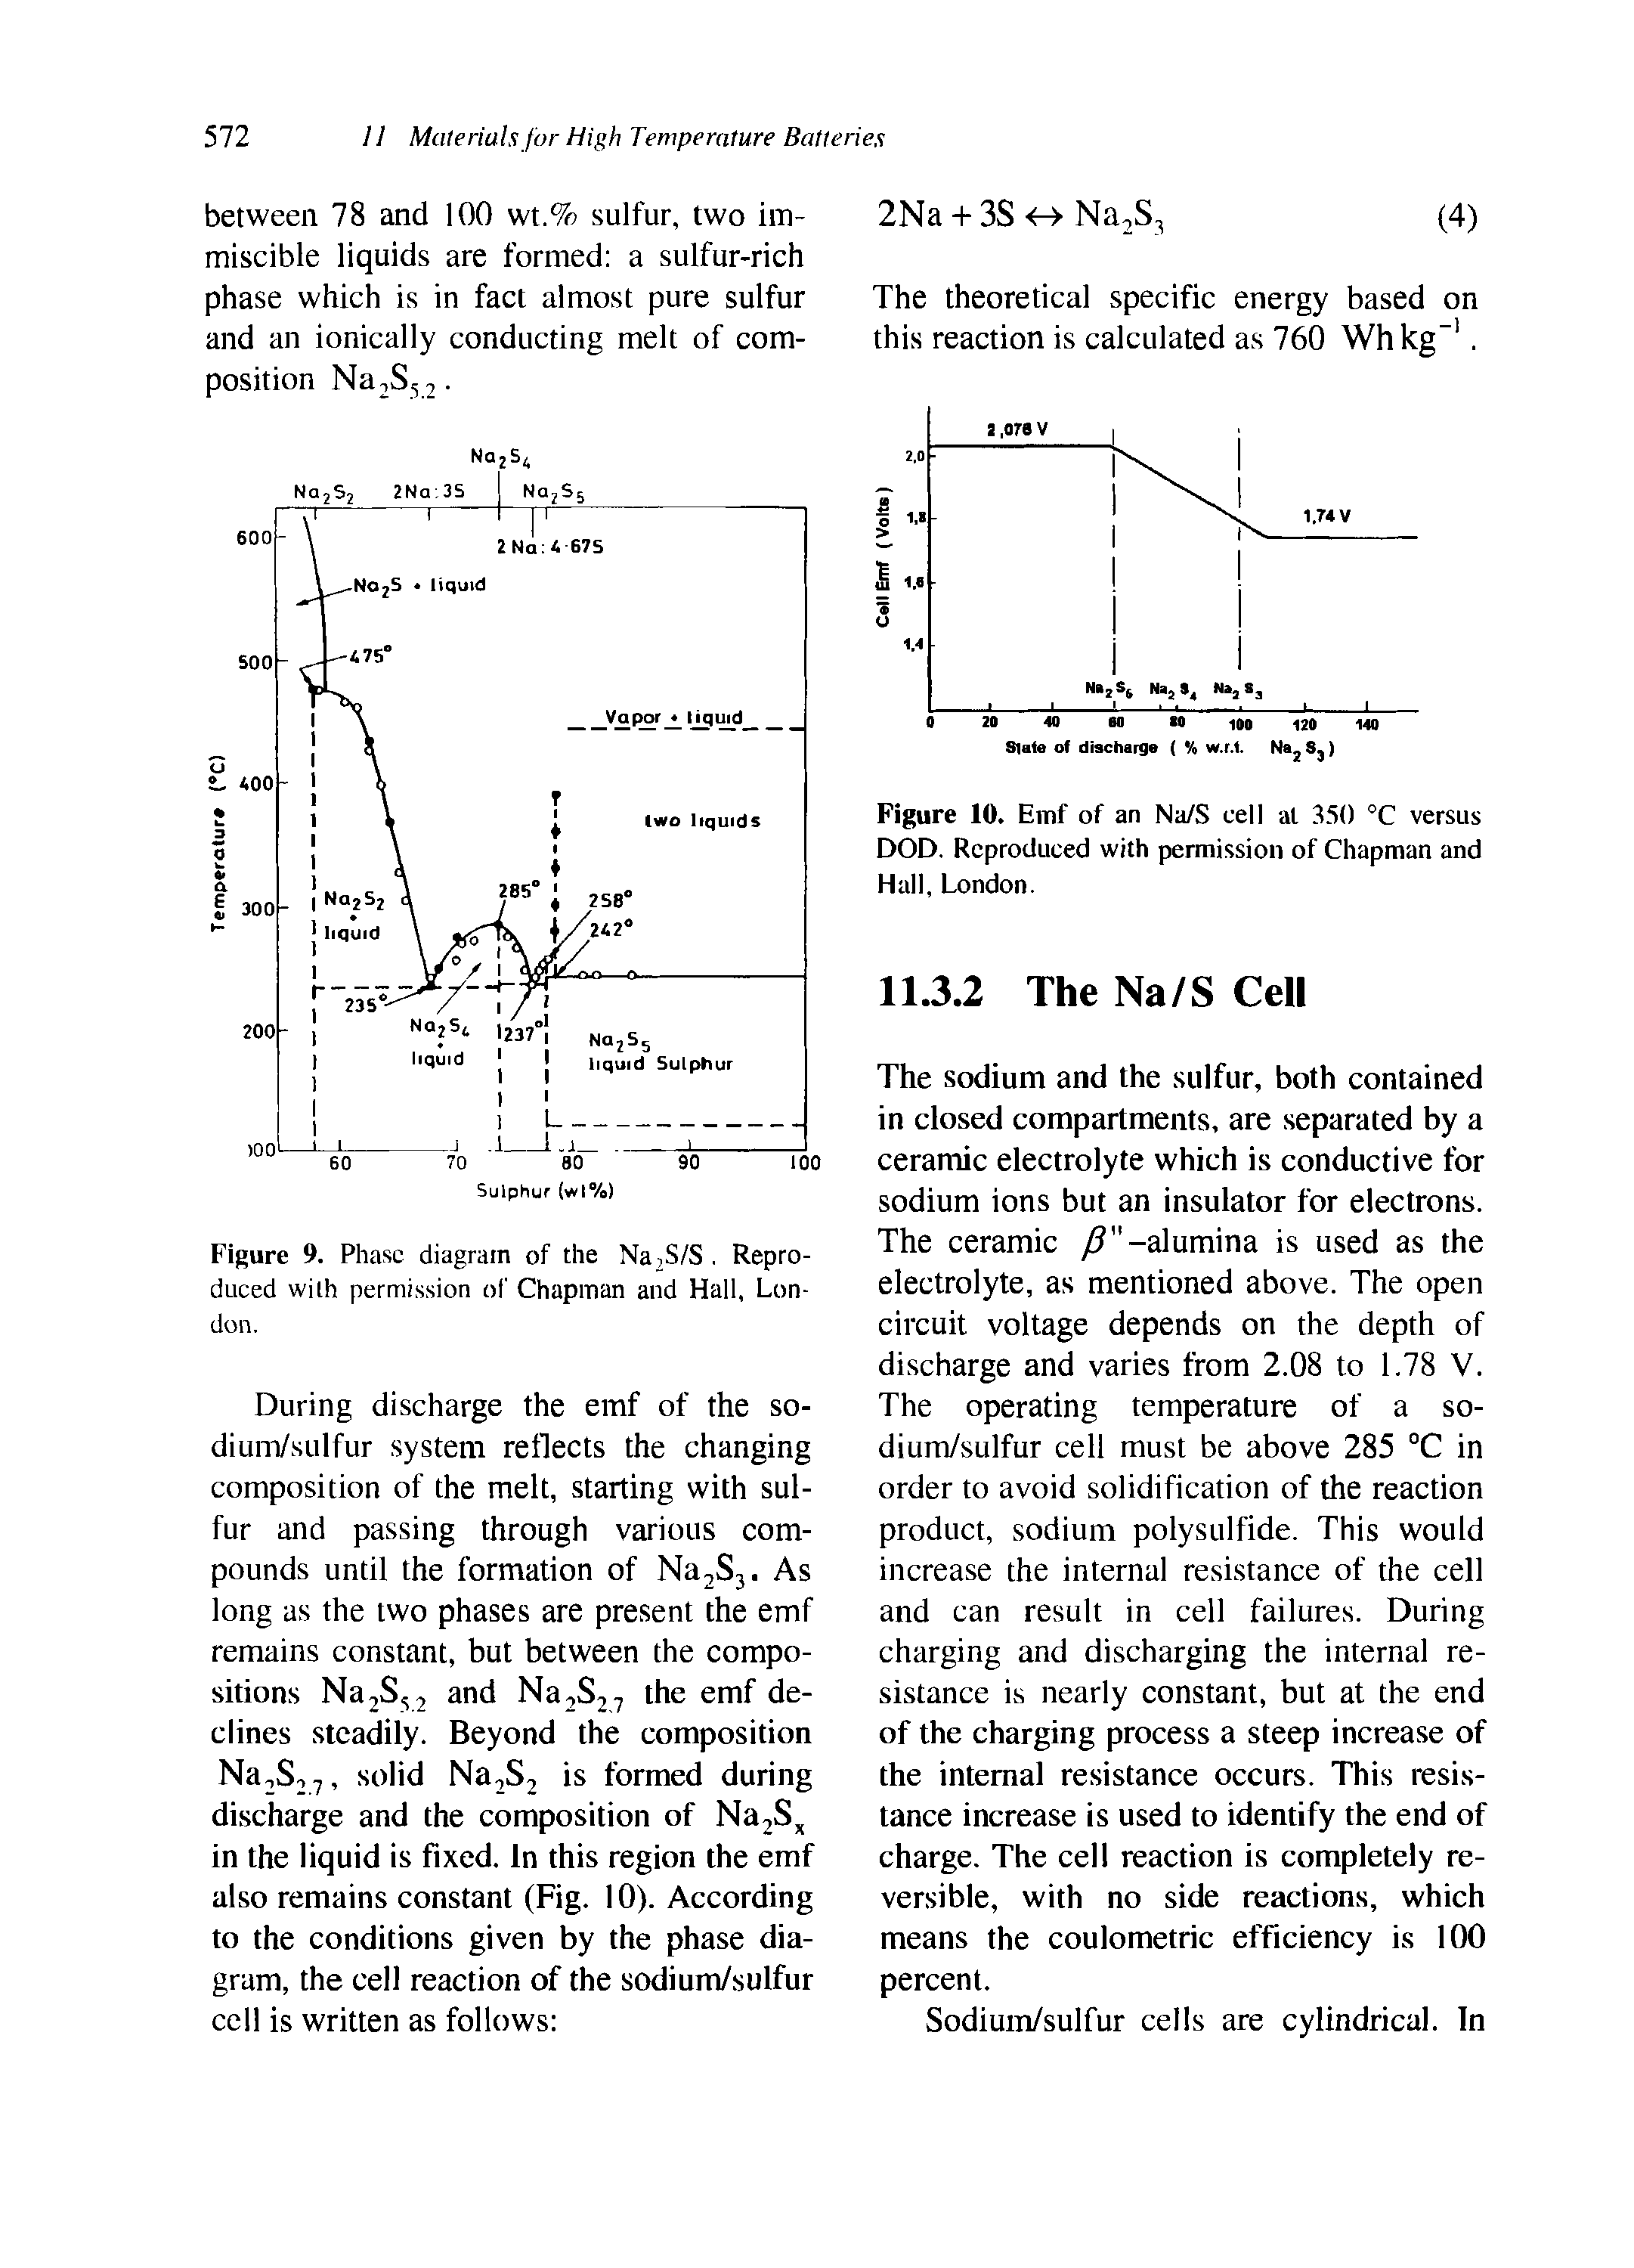 Figure 10. Emf of an Na/S cell at 350 °C versus DOD. Reproduced with permission of Chapman and Hall, London.